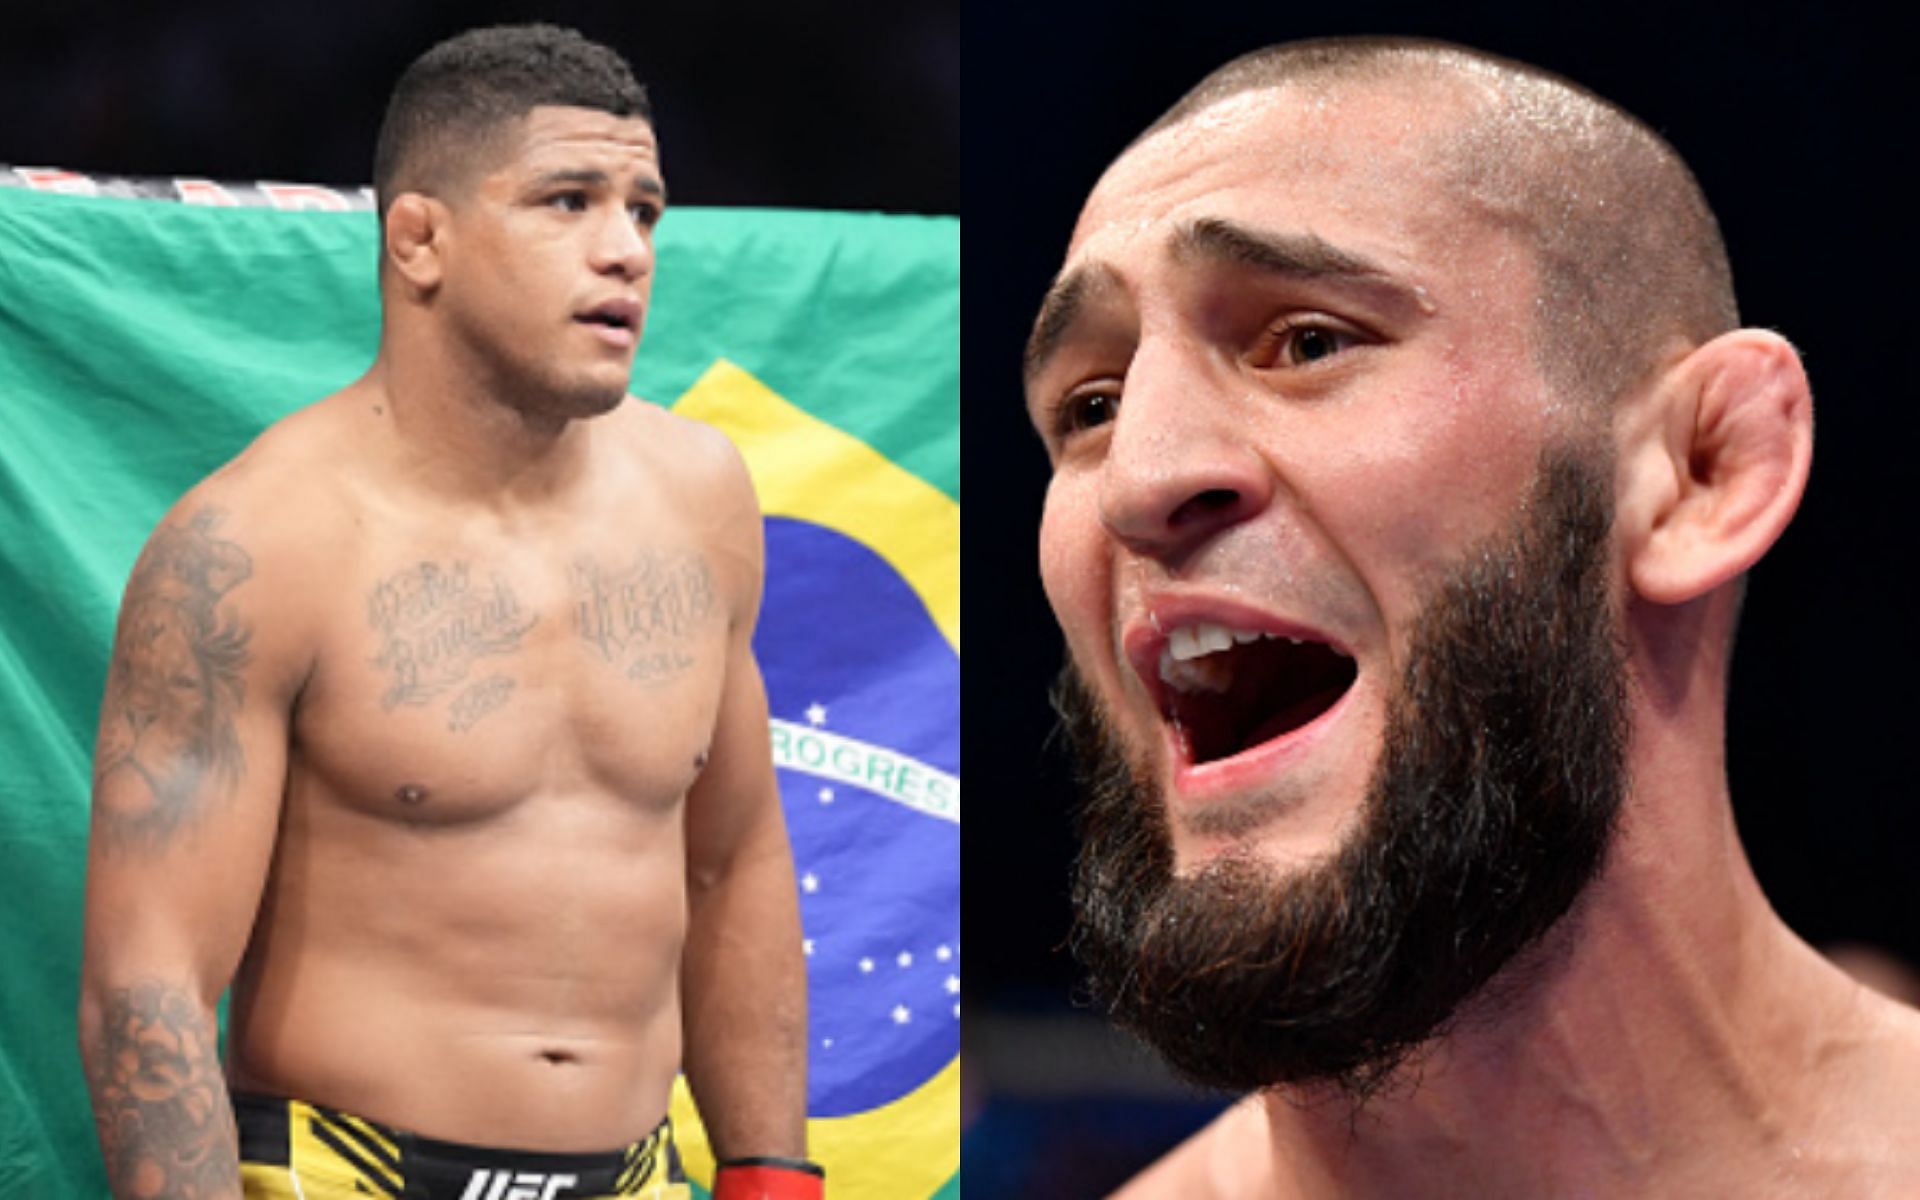 UFC News: A fight between Khamzat Chimaev and Gilbert Burns is being targeted for January 2022